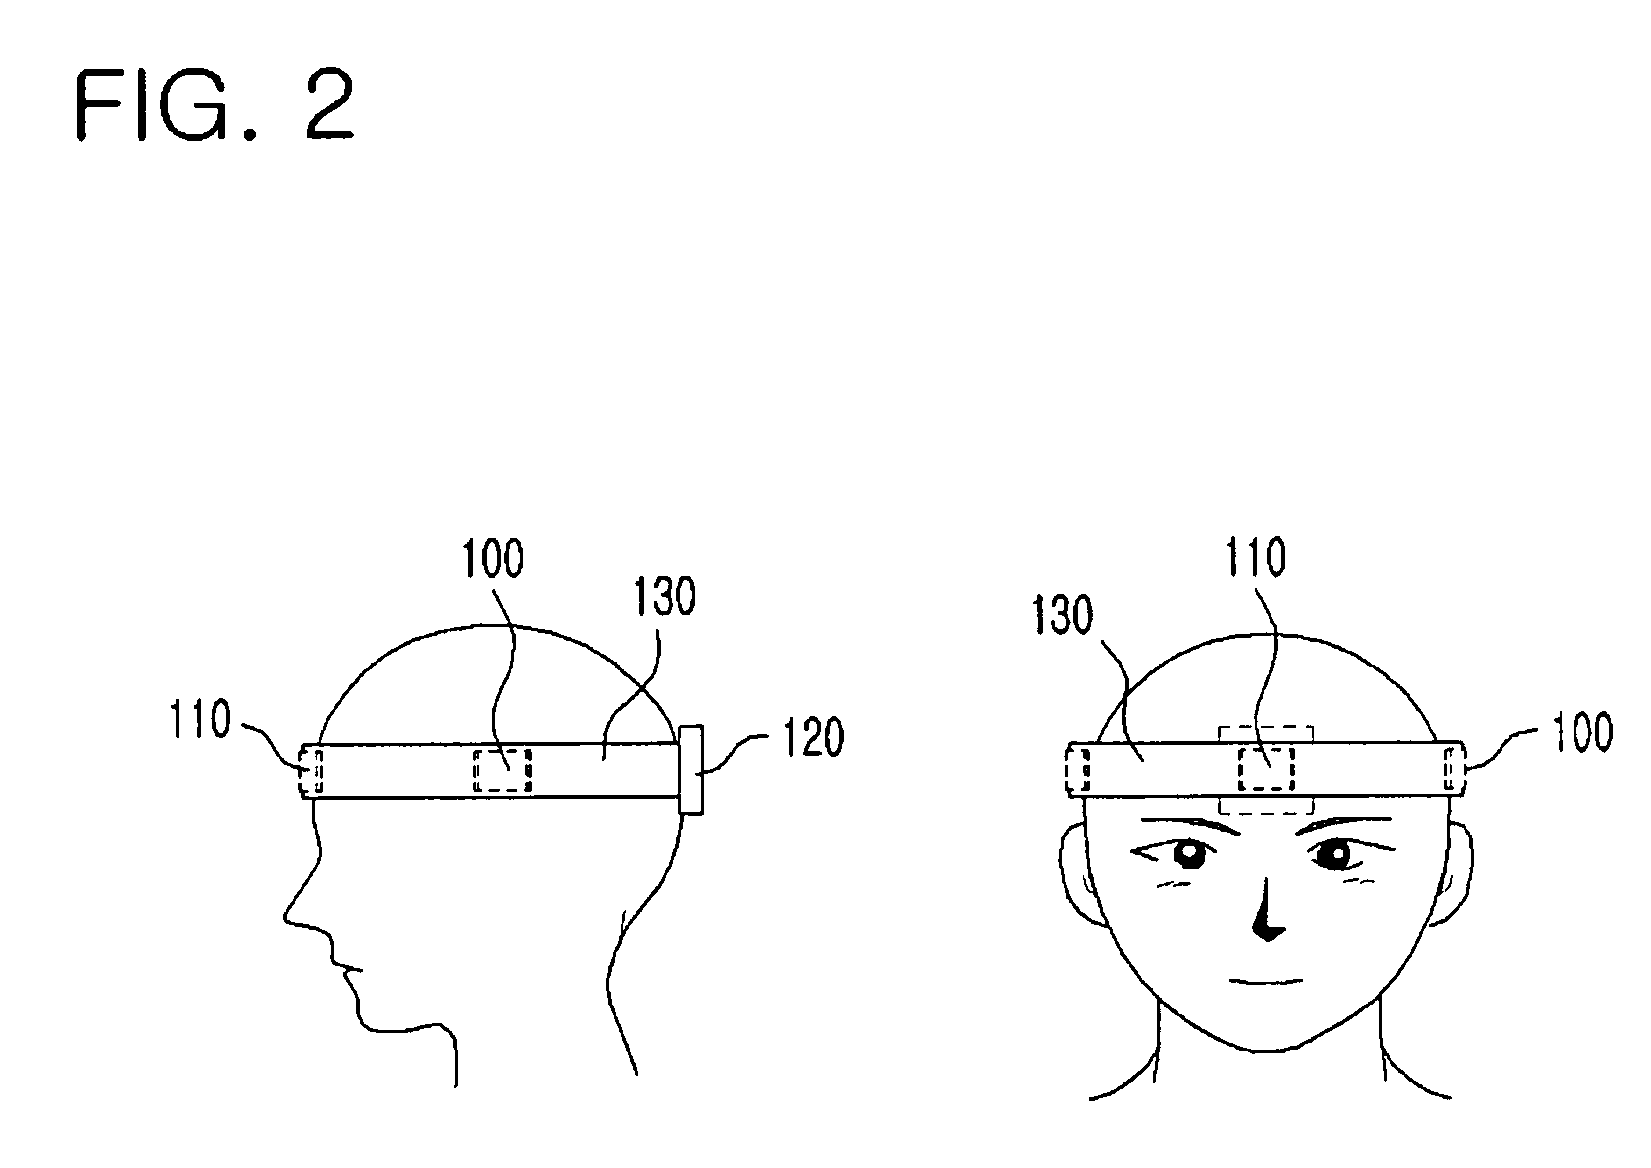 Apparatus and method for selecting and outputting character by teeth-clenching